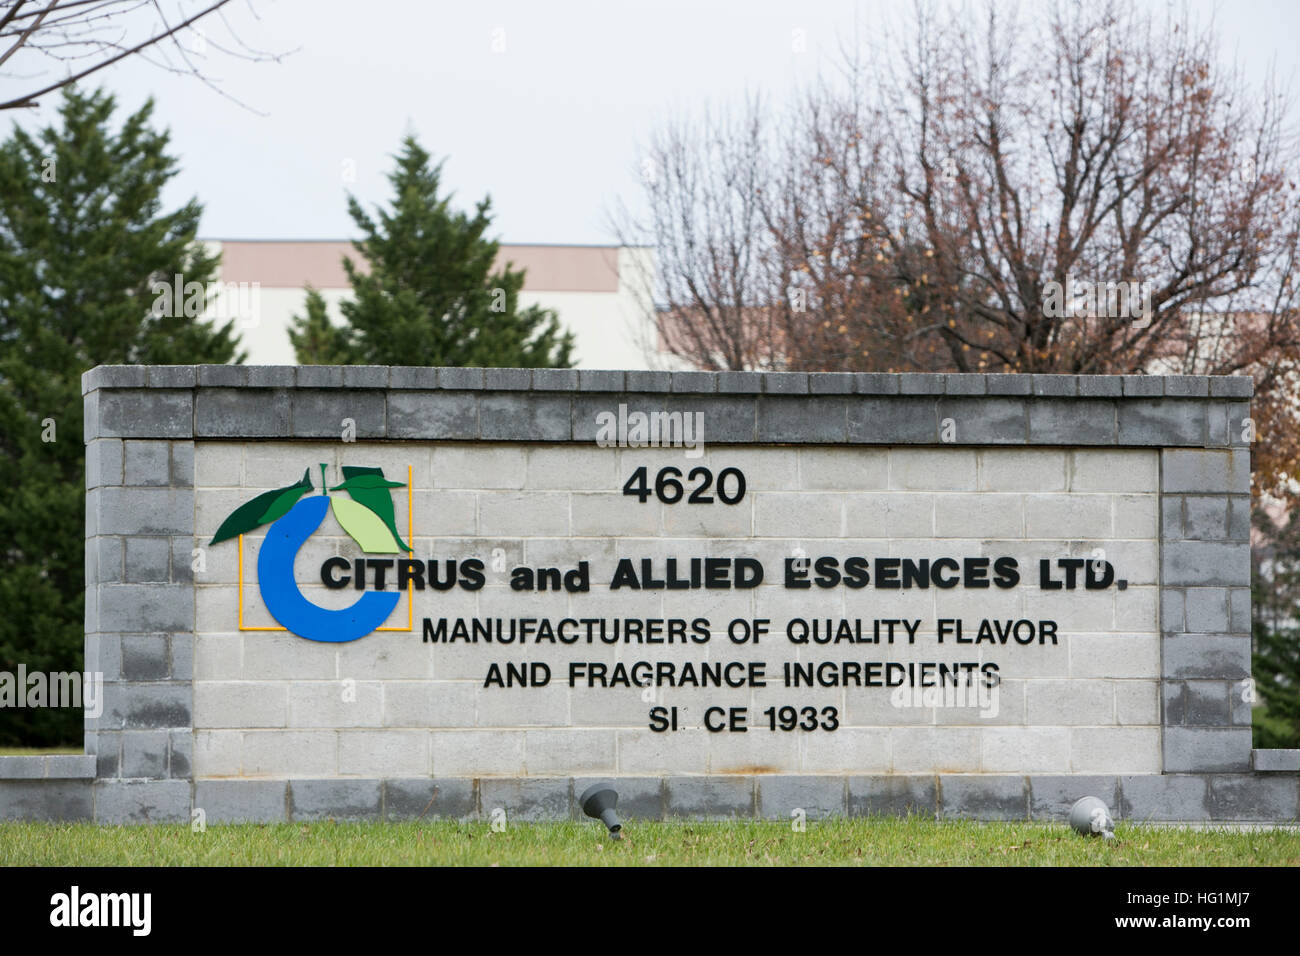 A logo sign outside of a facility occupied by Citrus and Allied Essences Ltd., in Belcamp, Maryland on December 11, 2016. Stock Photo